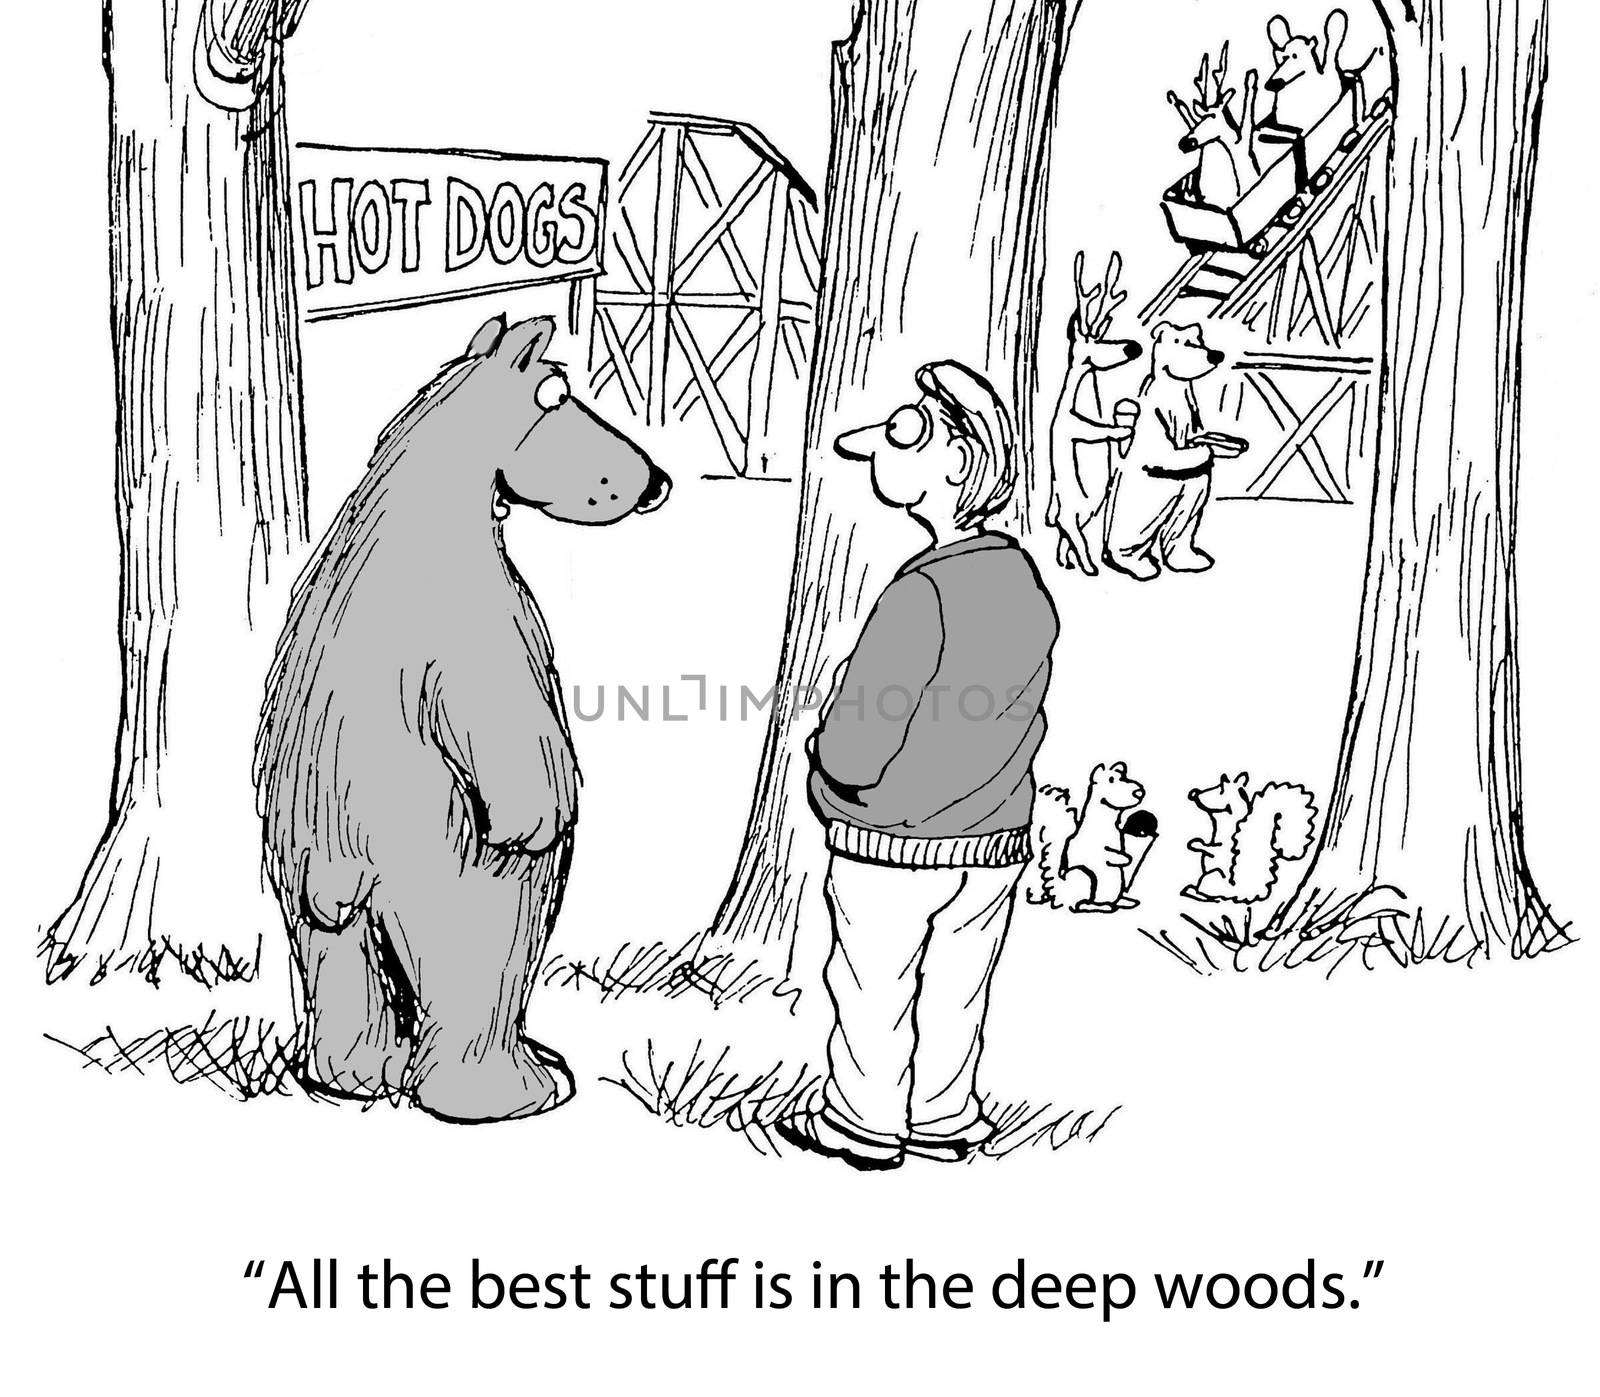 "Everything cool is to be found in the deep woods."